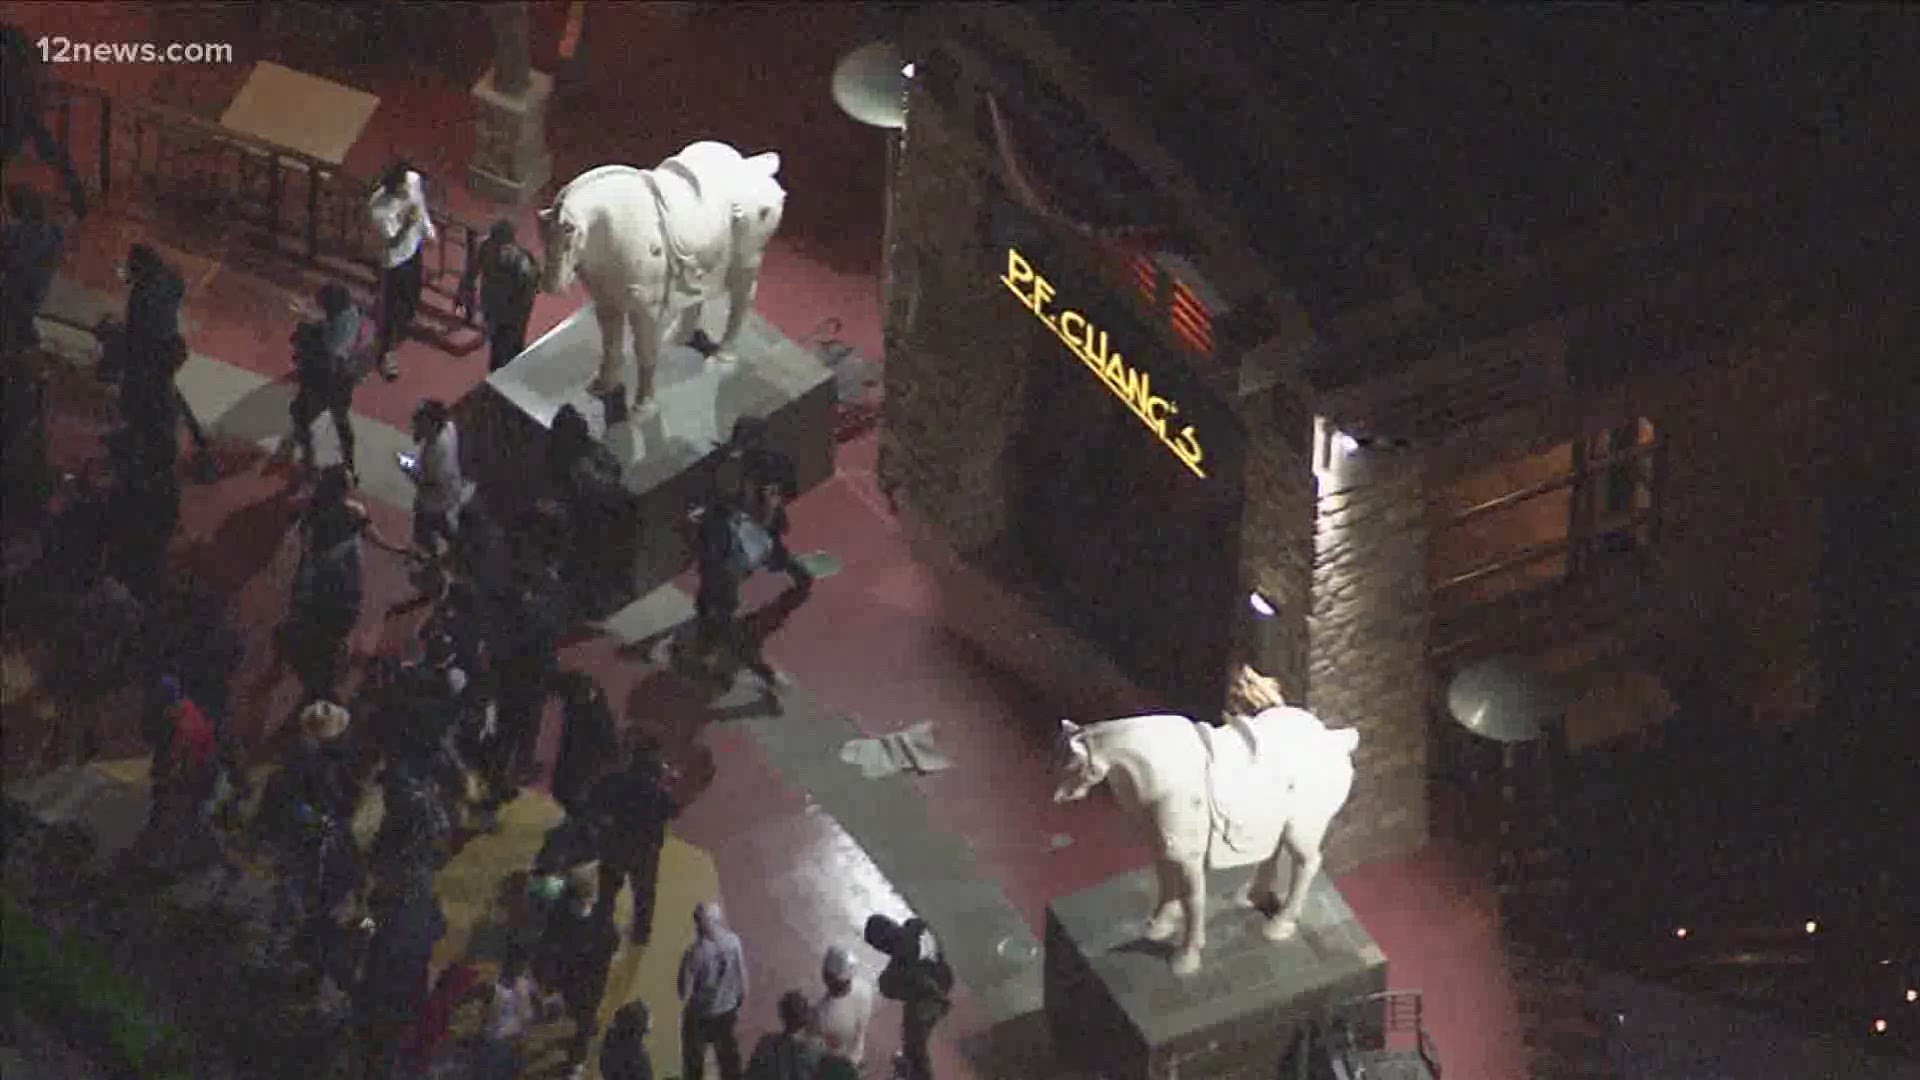 Sky 12 was over the scene as a P.F. Chang's in Scottsdale was damaged during a protest Saturday night.